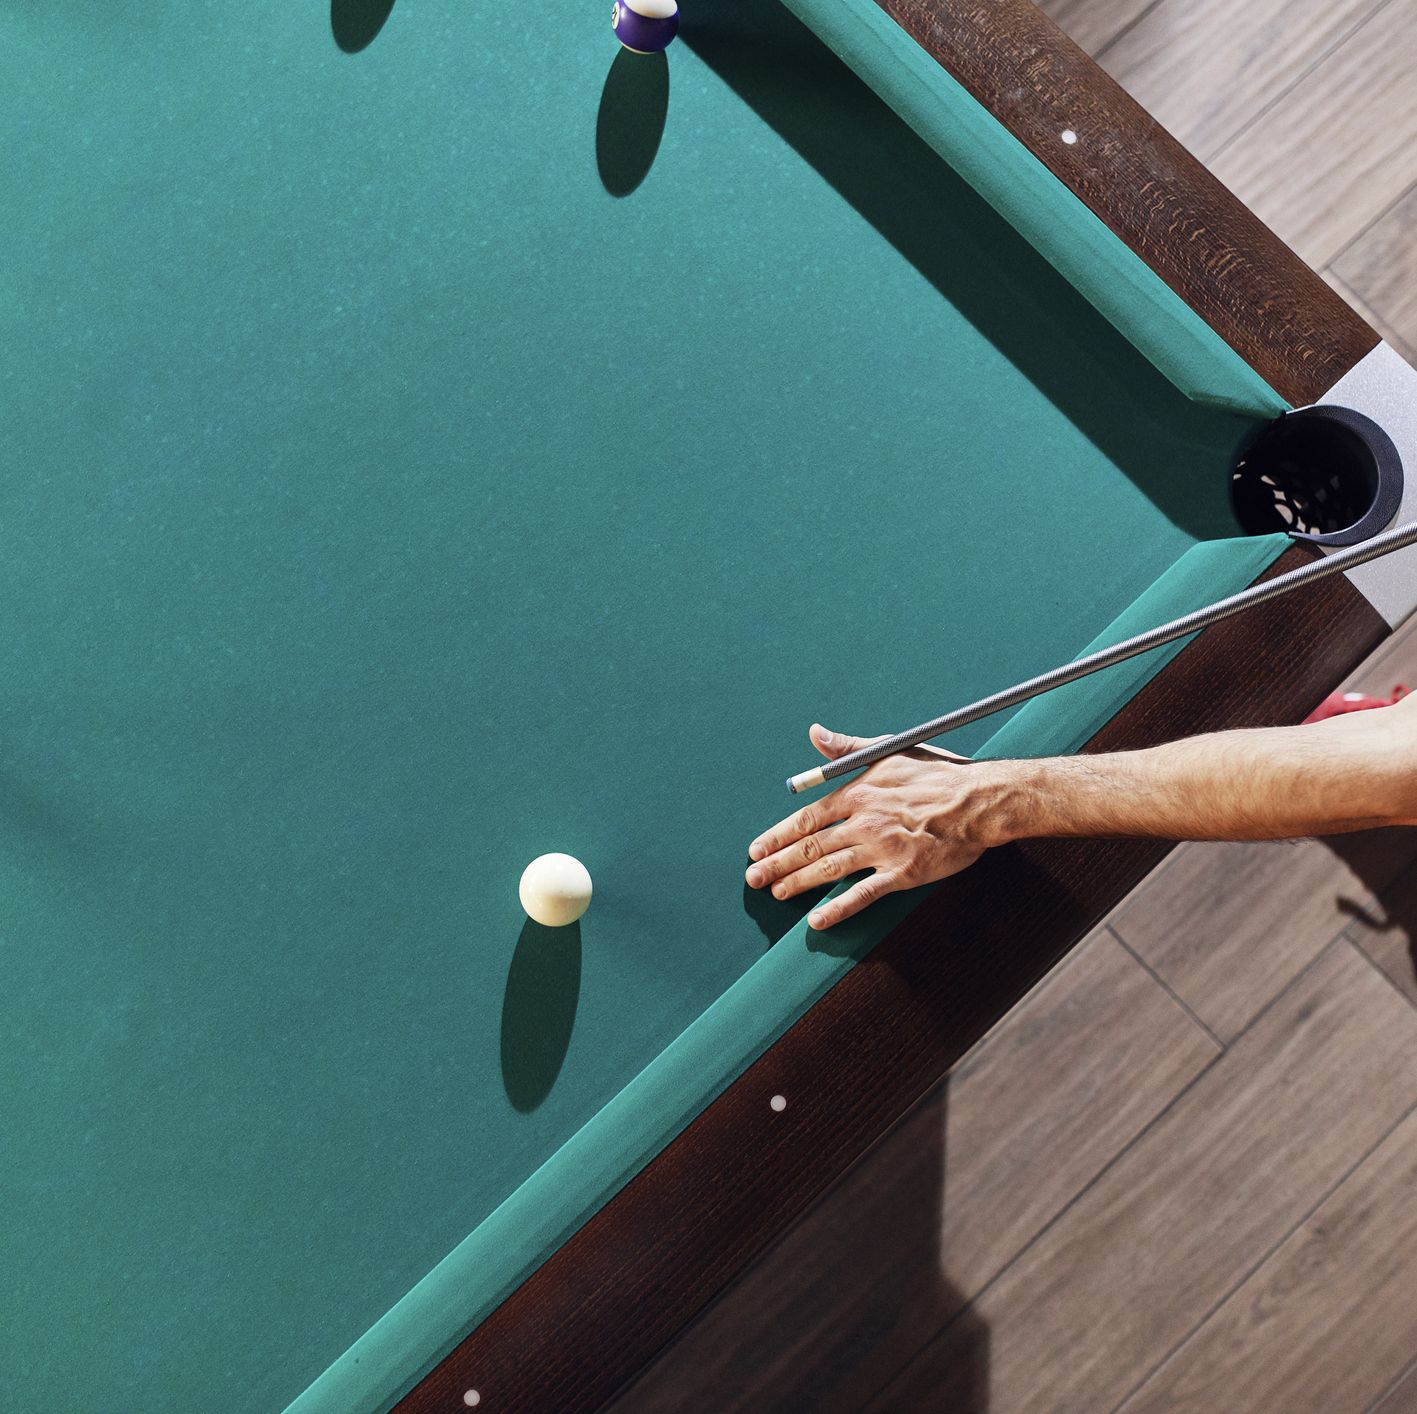 How to Use Math to Improve Your Pool Game